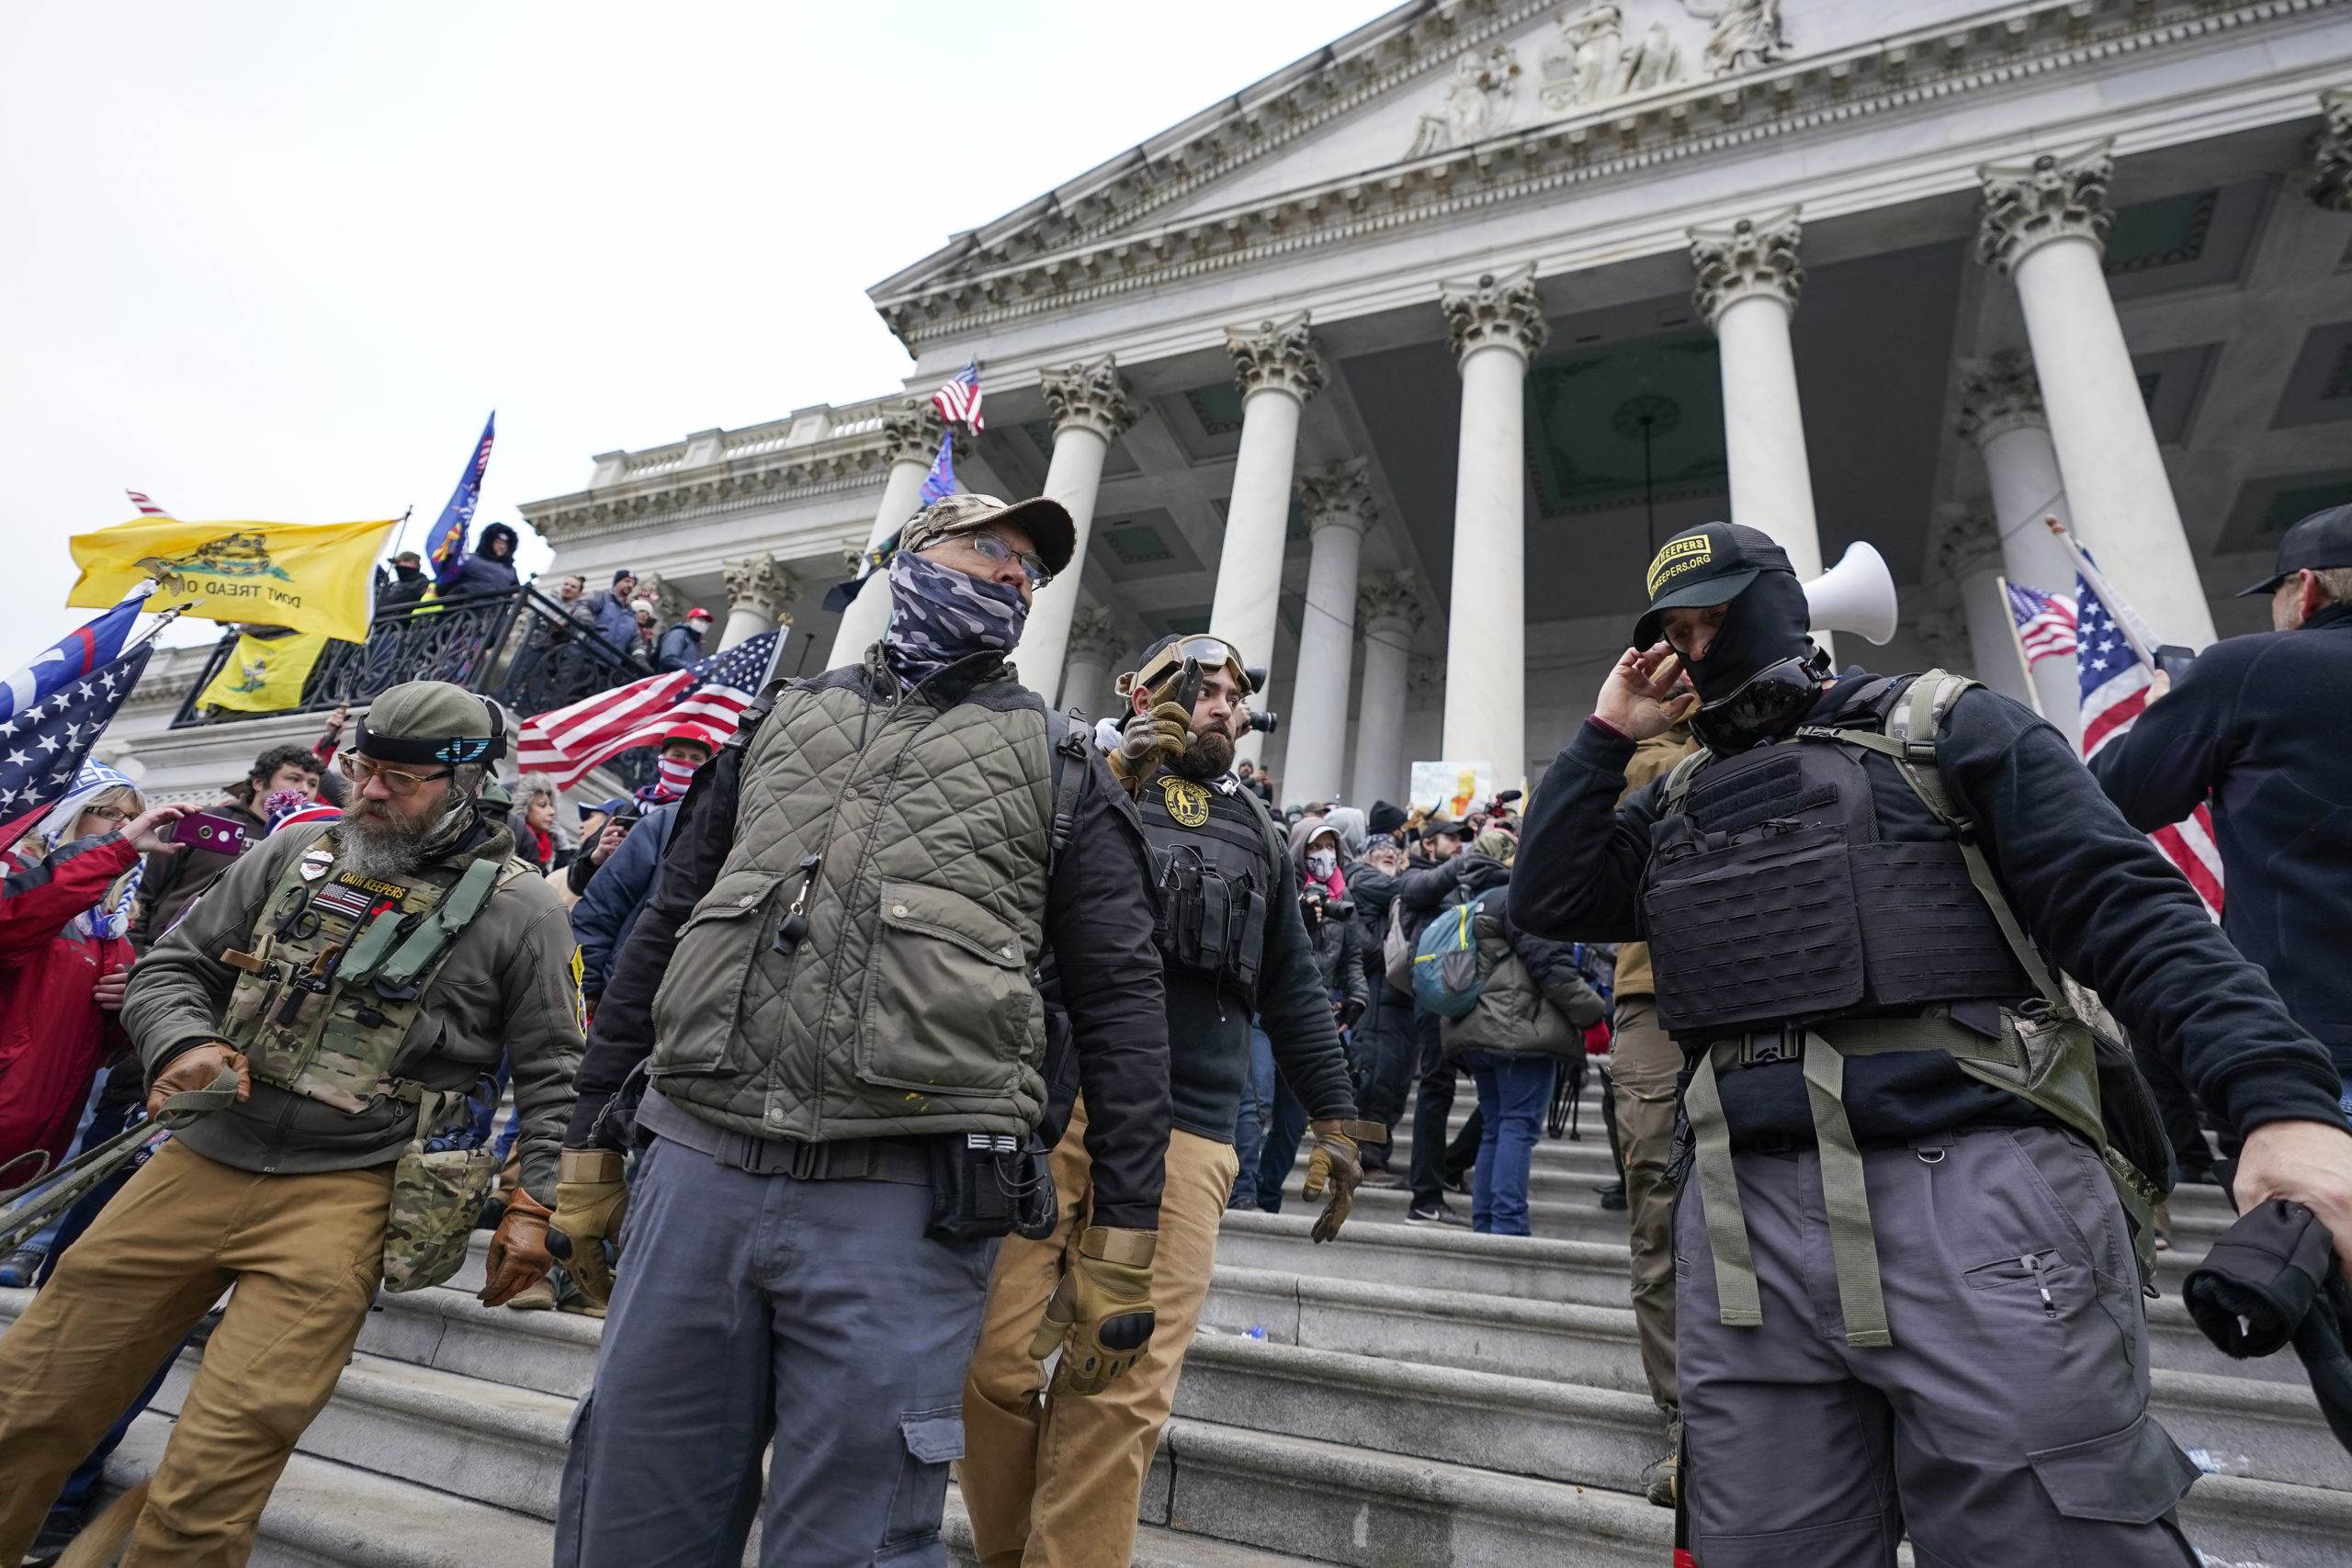 ‘There was no plan’: Oath Keepers begin mounting defense to seditious conspiracy charges